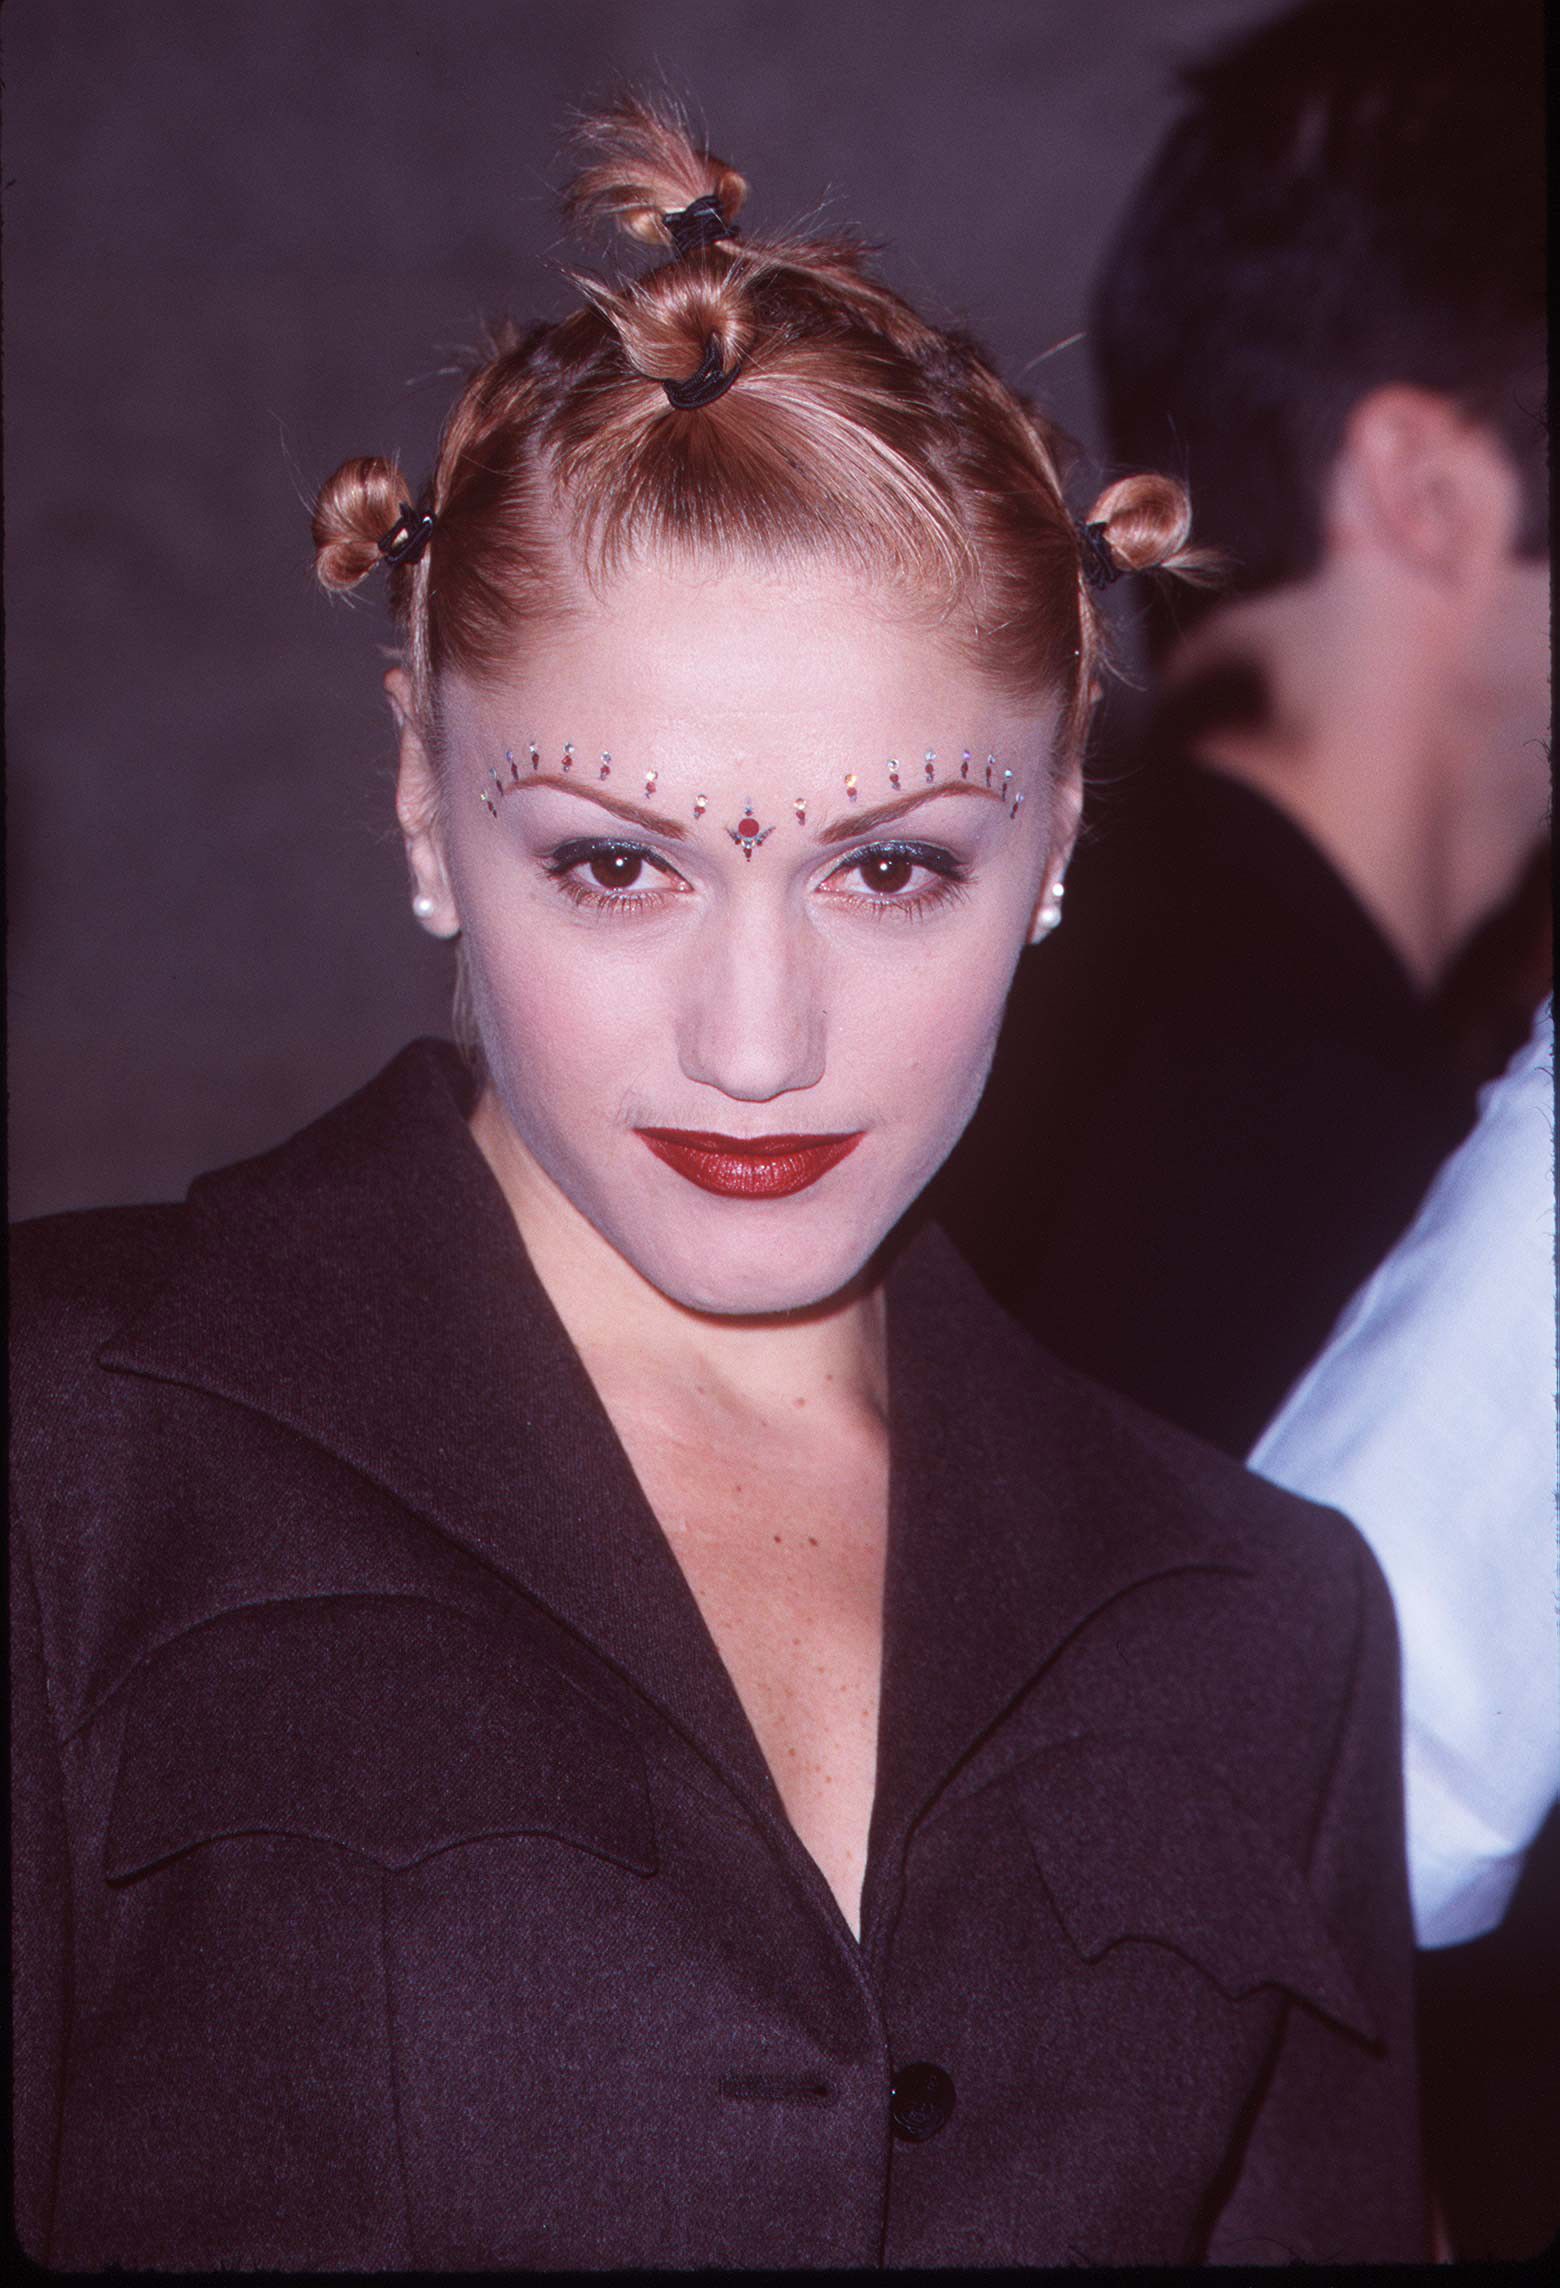 20 Embarrassing 90s Beauty Trends Bad Nineties Hair And Makeup